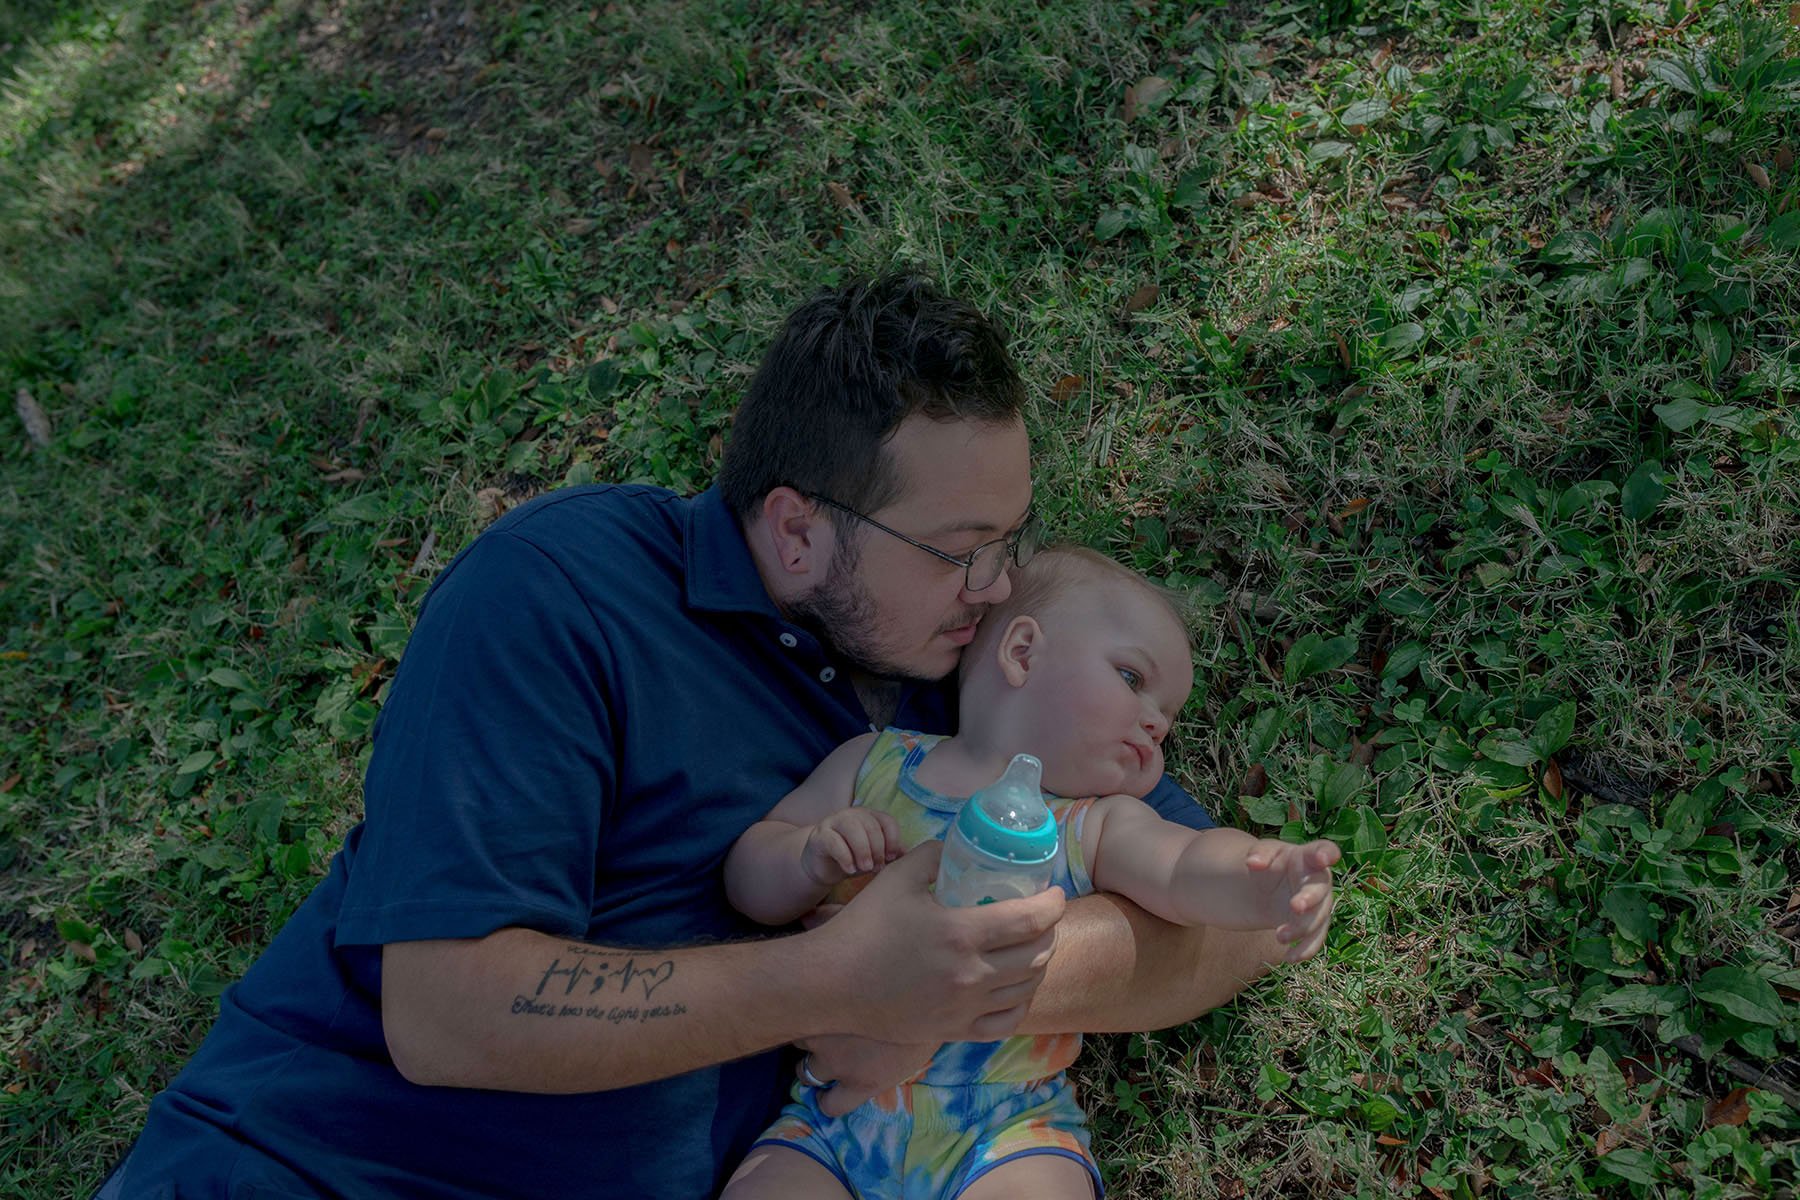 Steven Bryant plays with his son in the grass while holding a baby bottle.